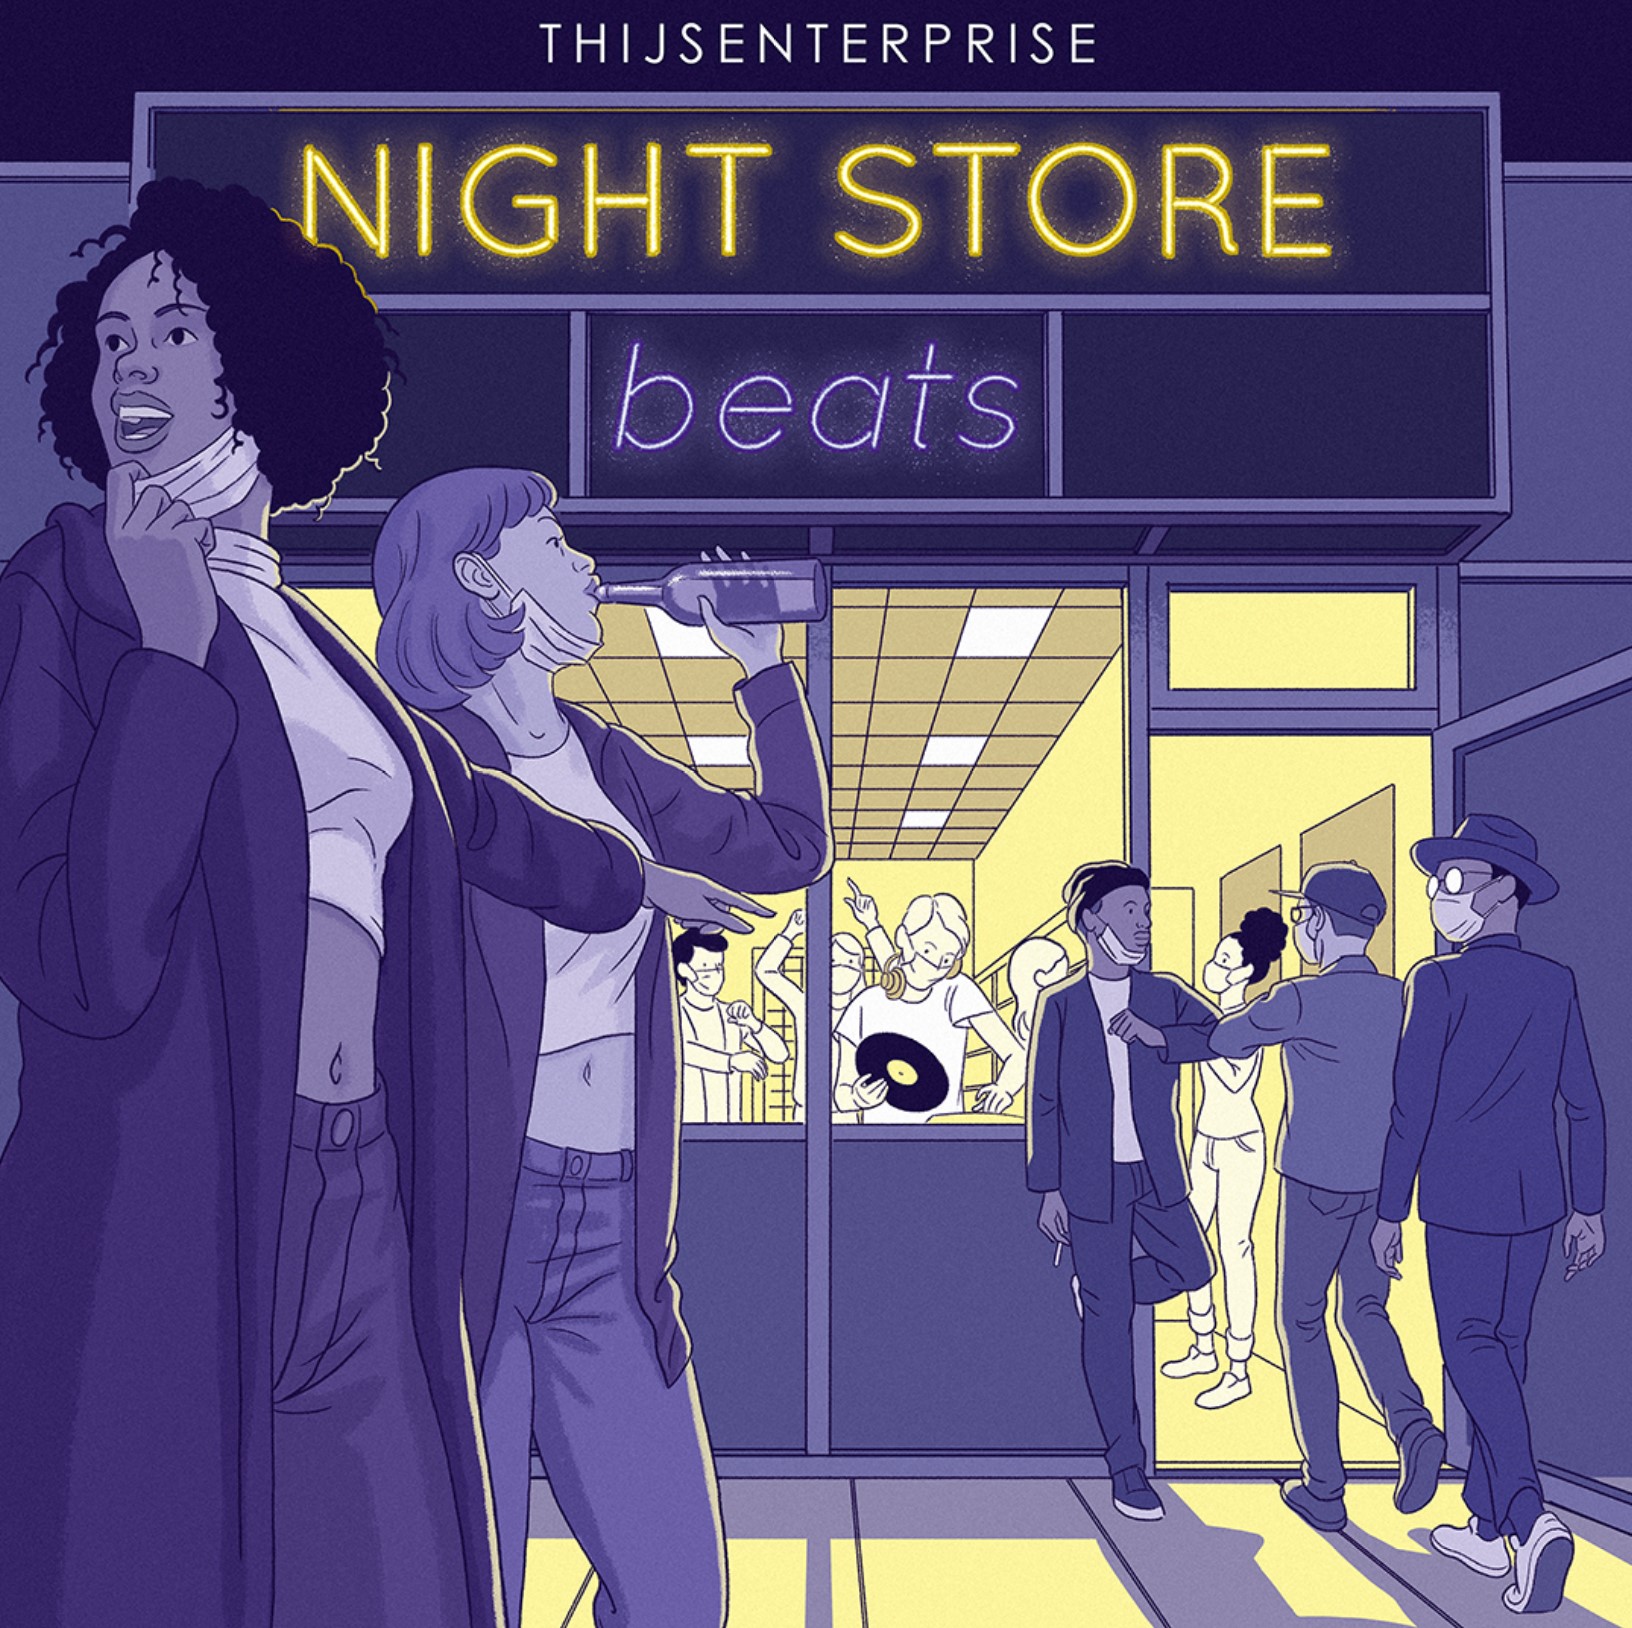 Soul Food, Skunk Breaks & Night Store Beats (Two New Beat Tapes)